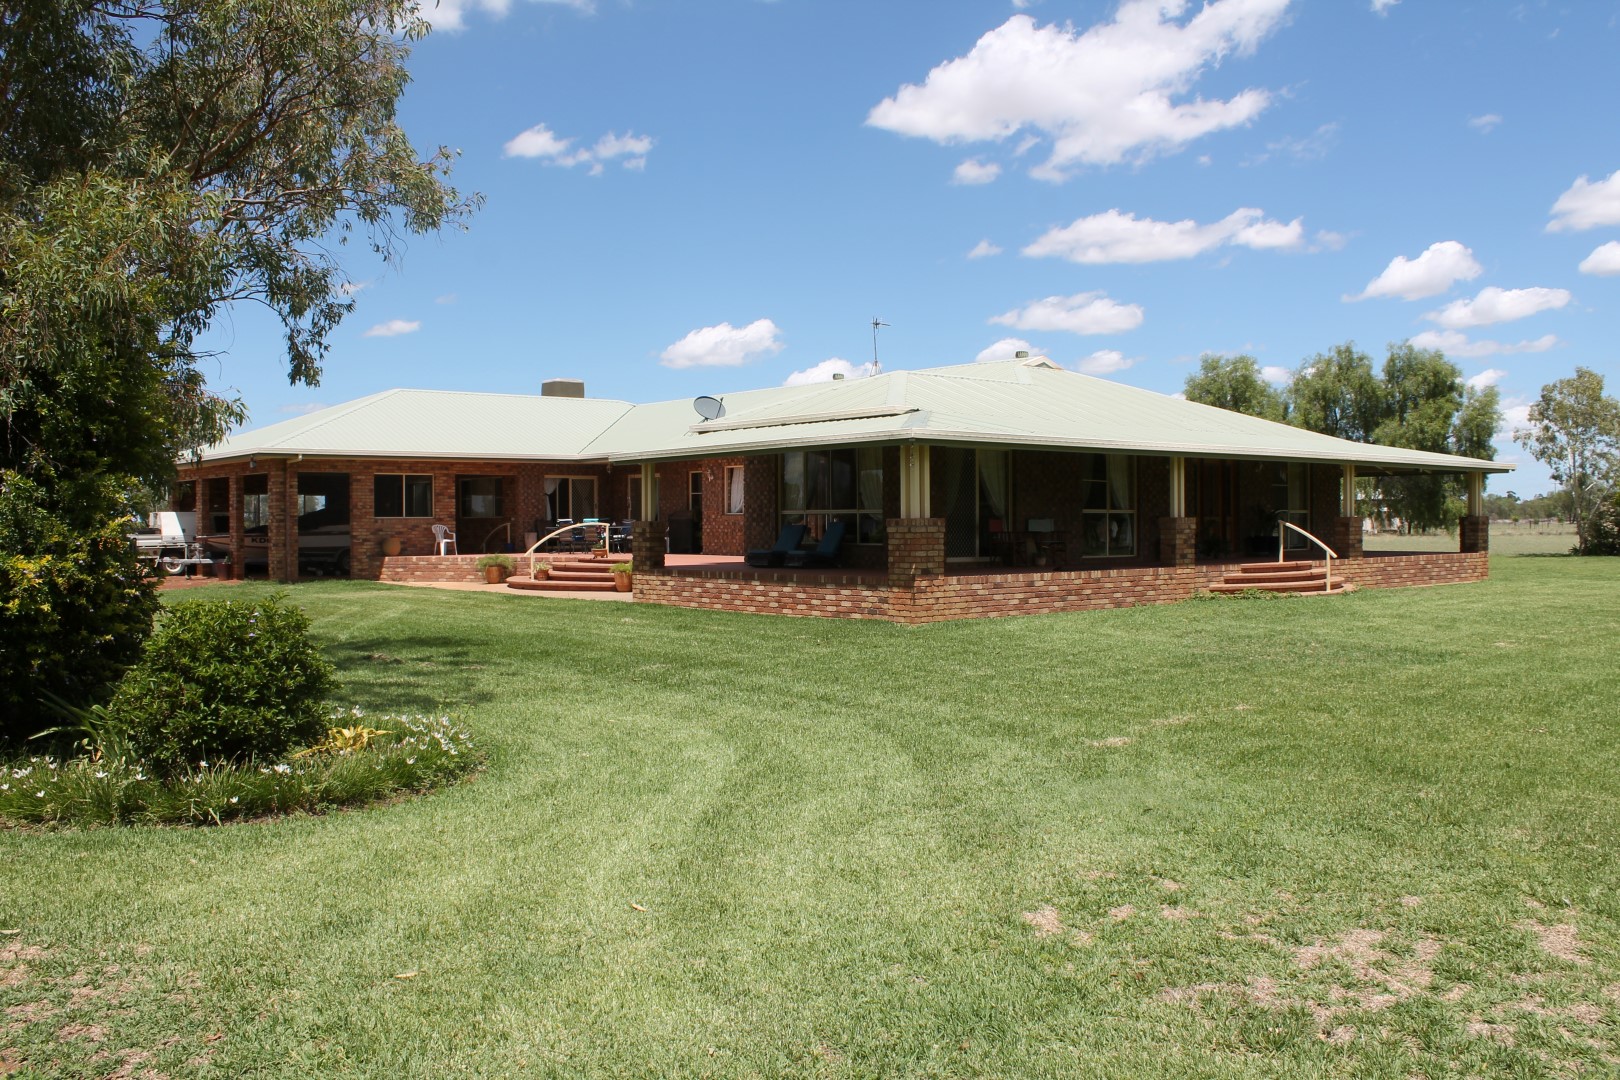 Images Ray White Rural St George